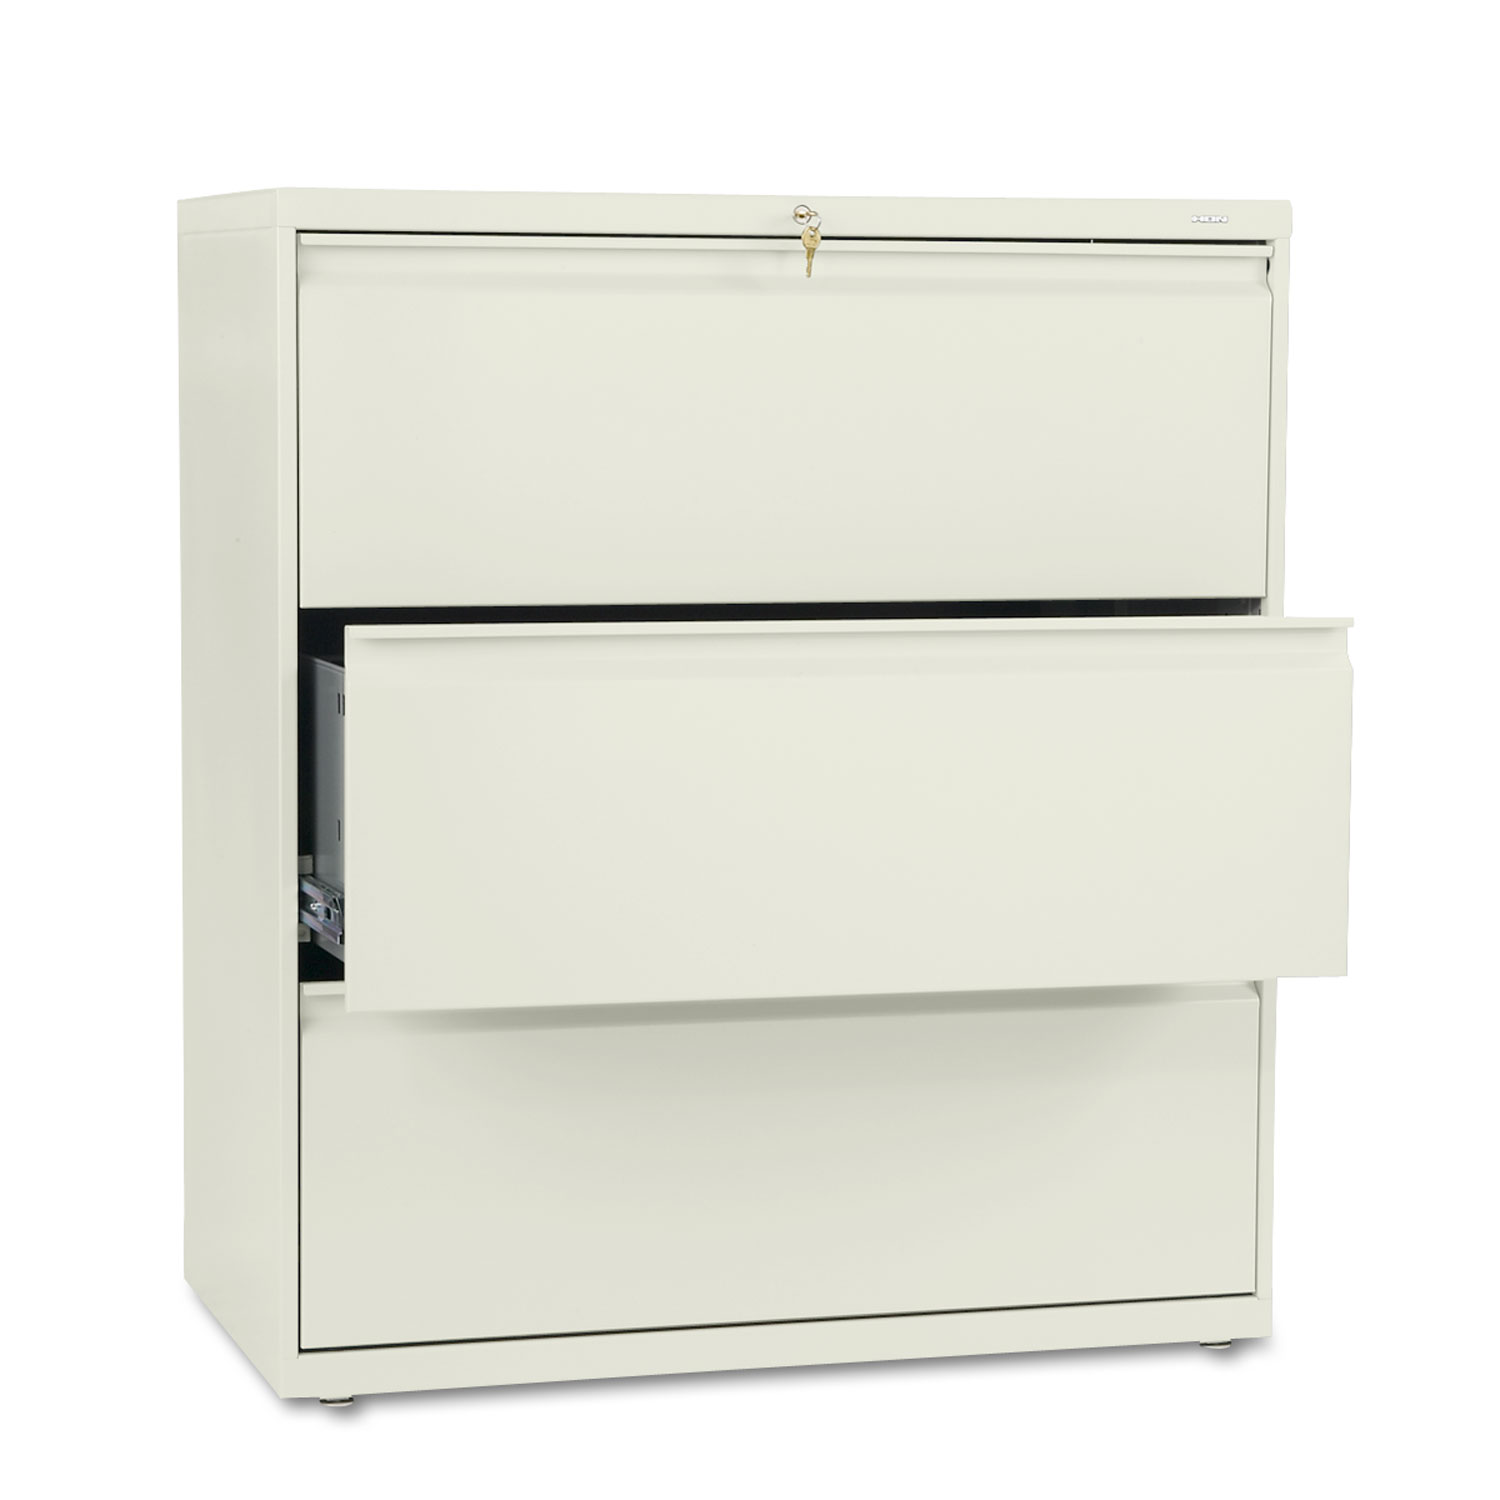 800 Series Three-Drawer Lateral File, 36w x 19-1/4d x 40-7/8h, Putty